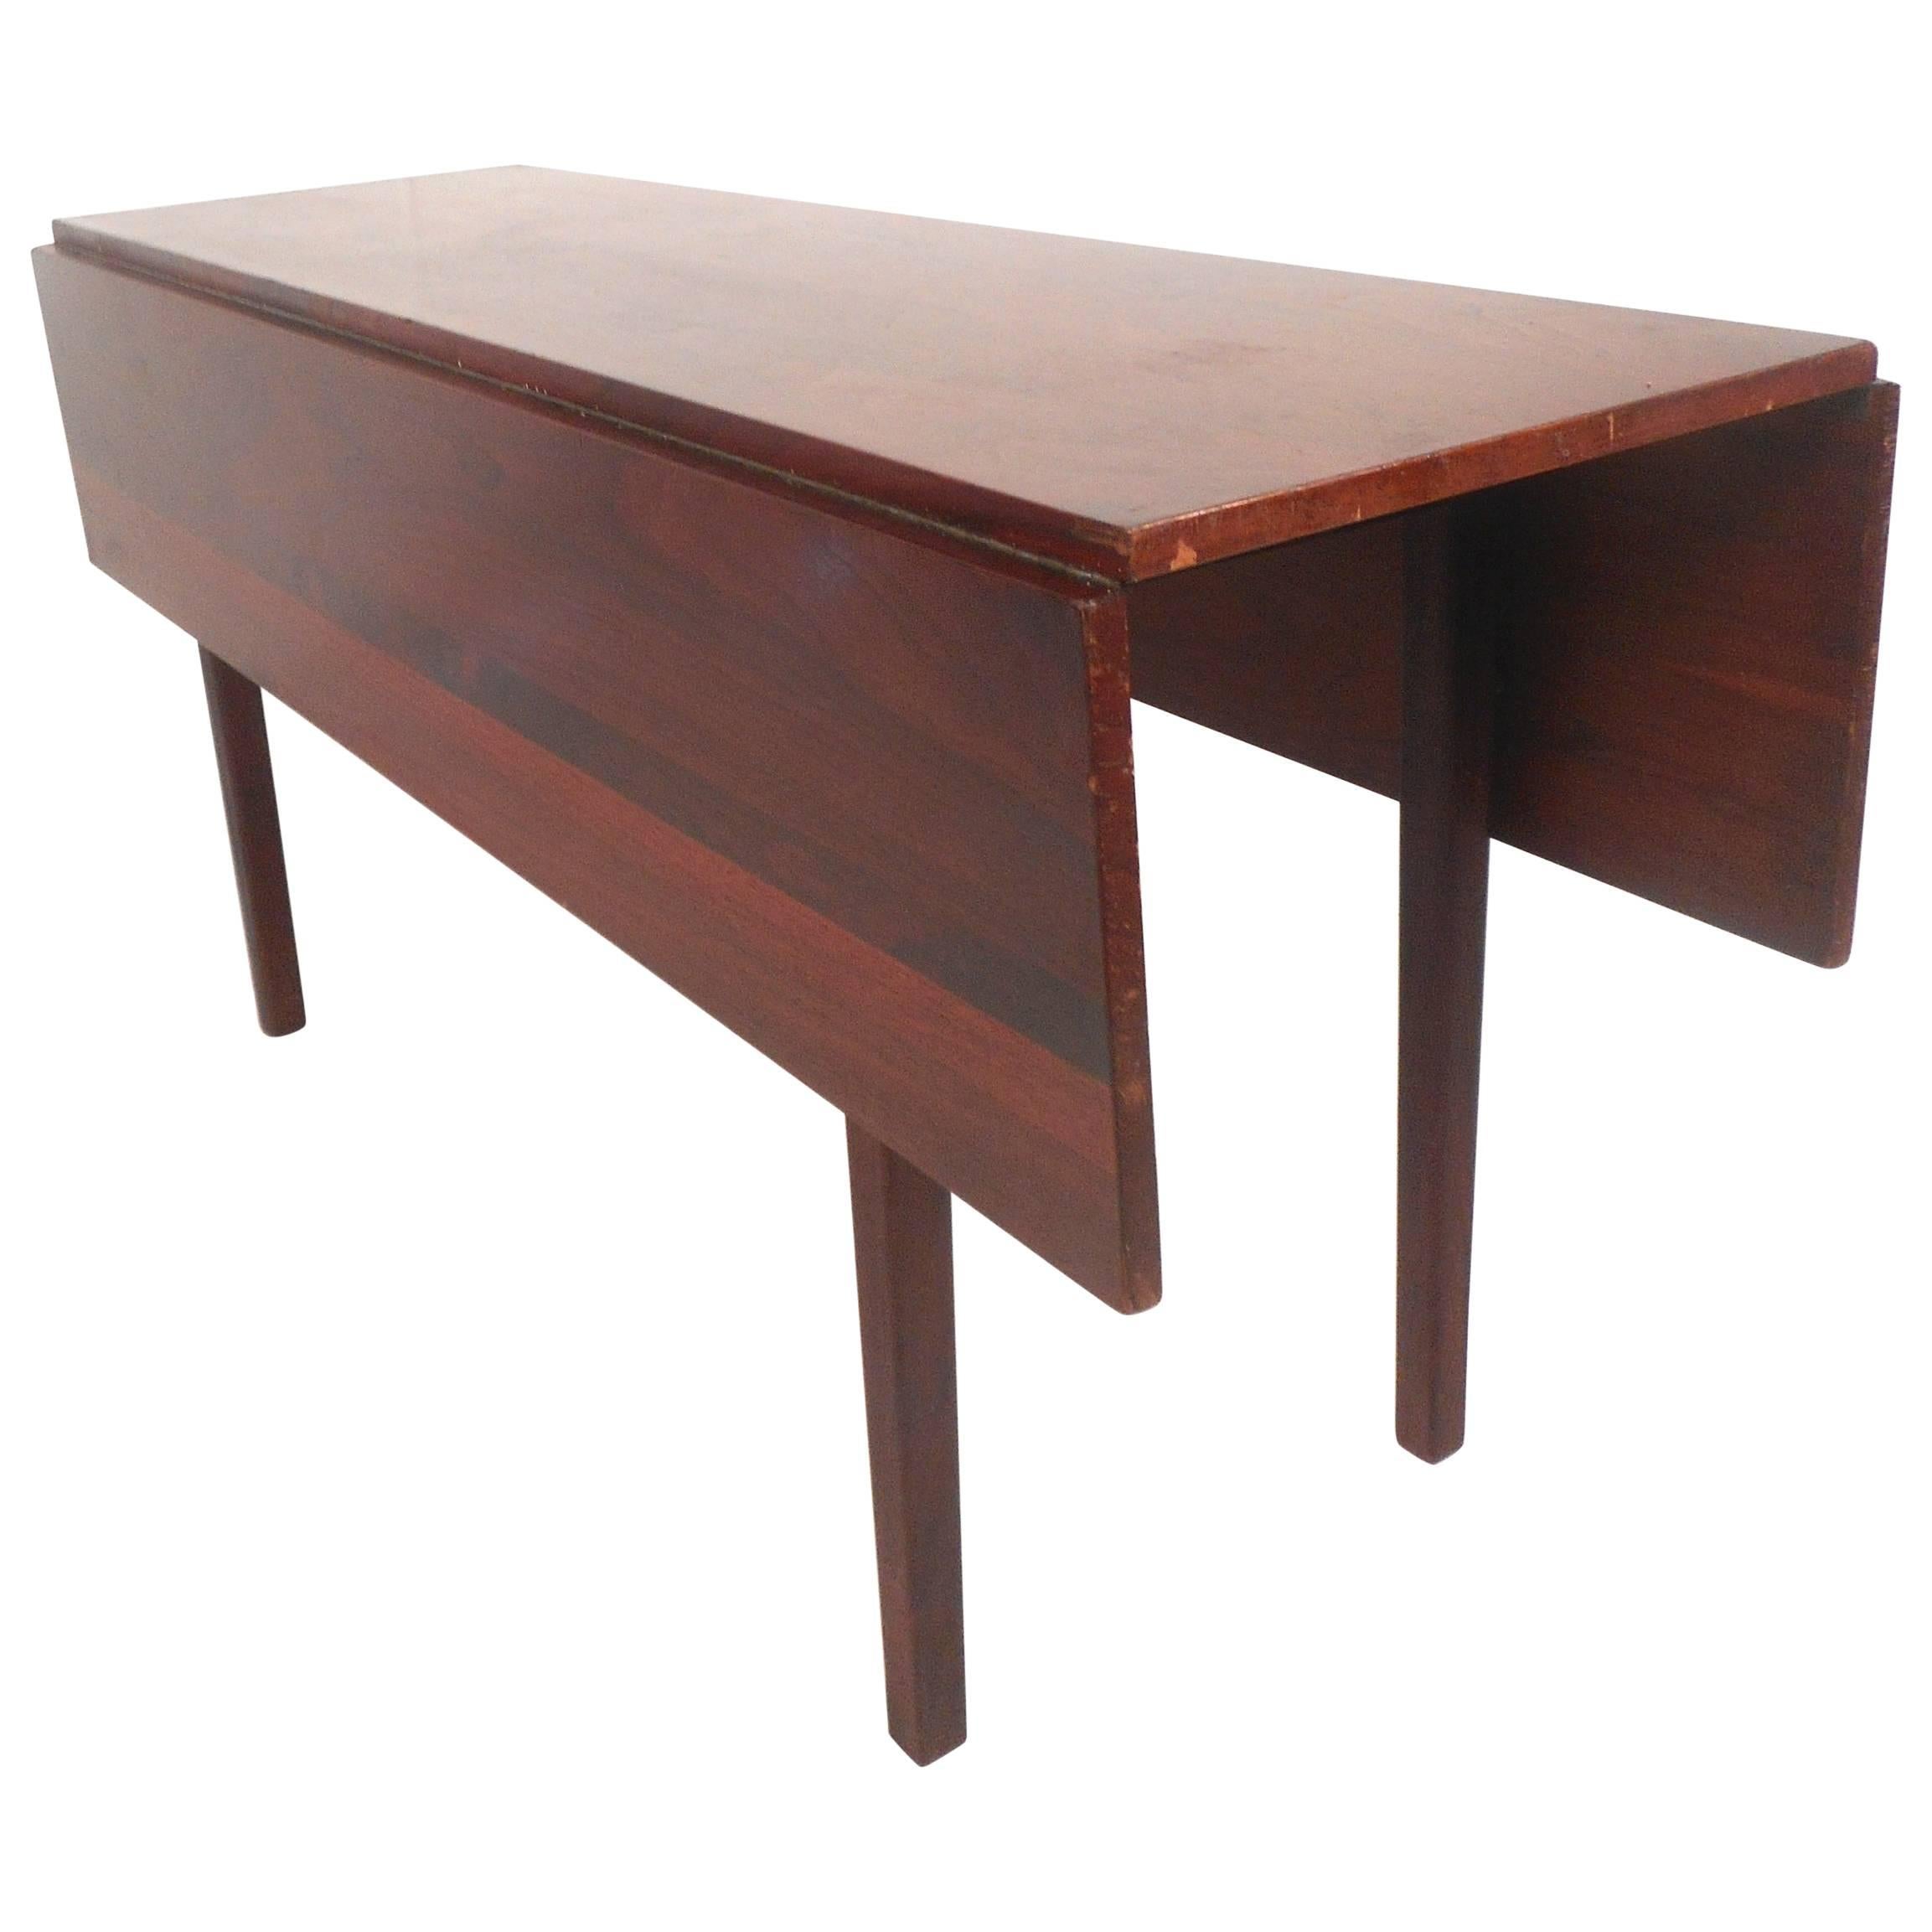 Unique Mid-Century Modern Walnut and Rosewood Dining Table